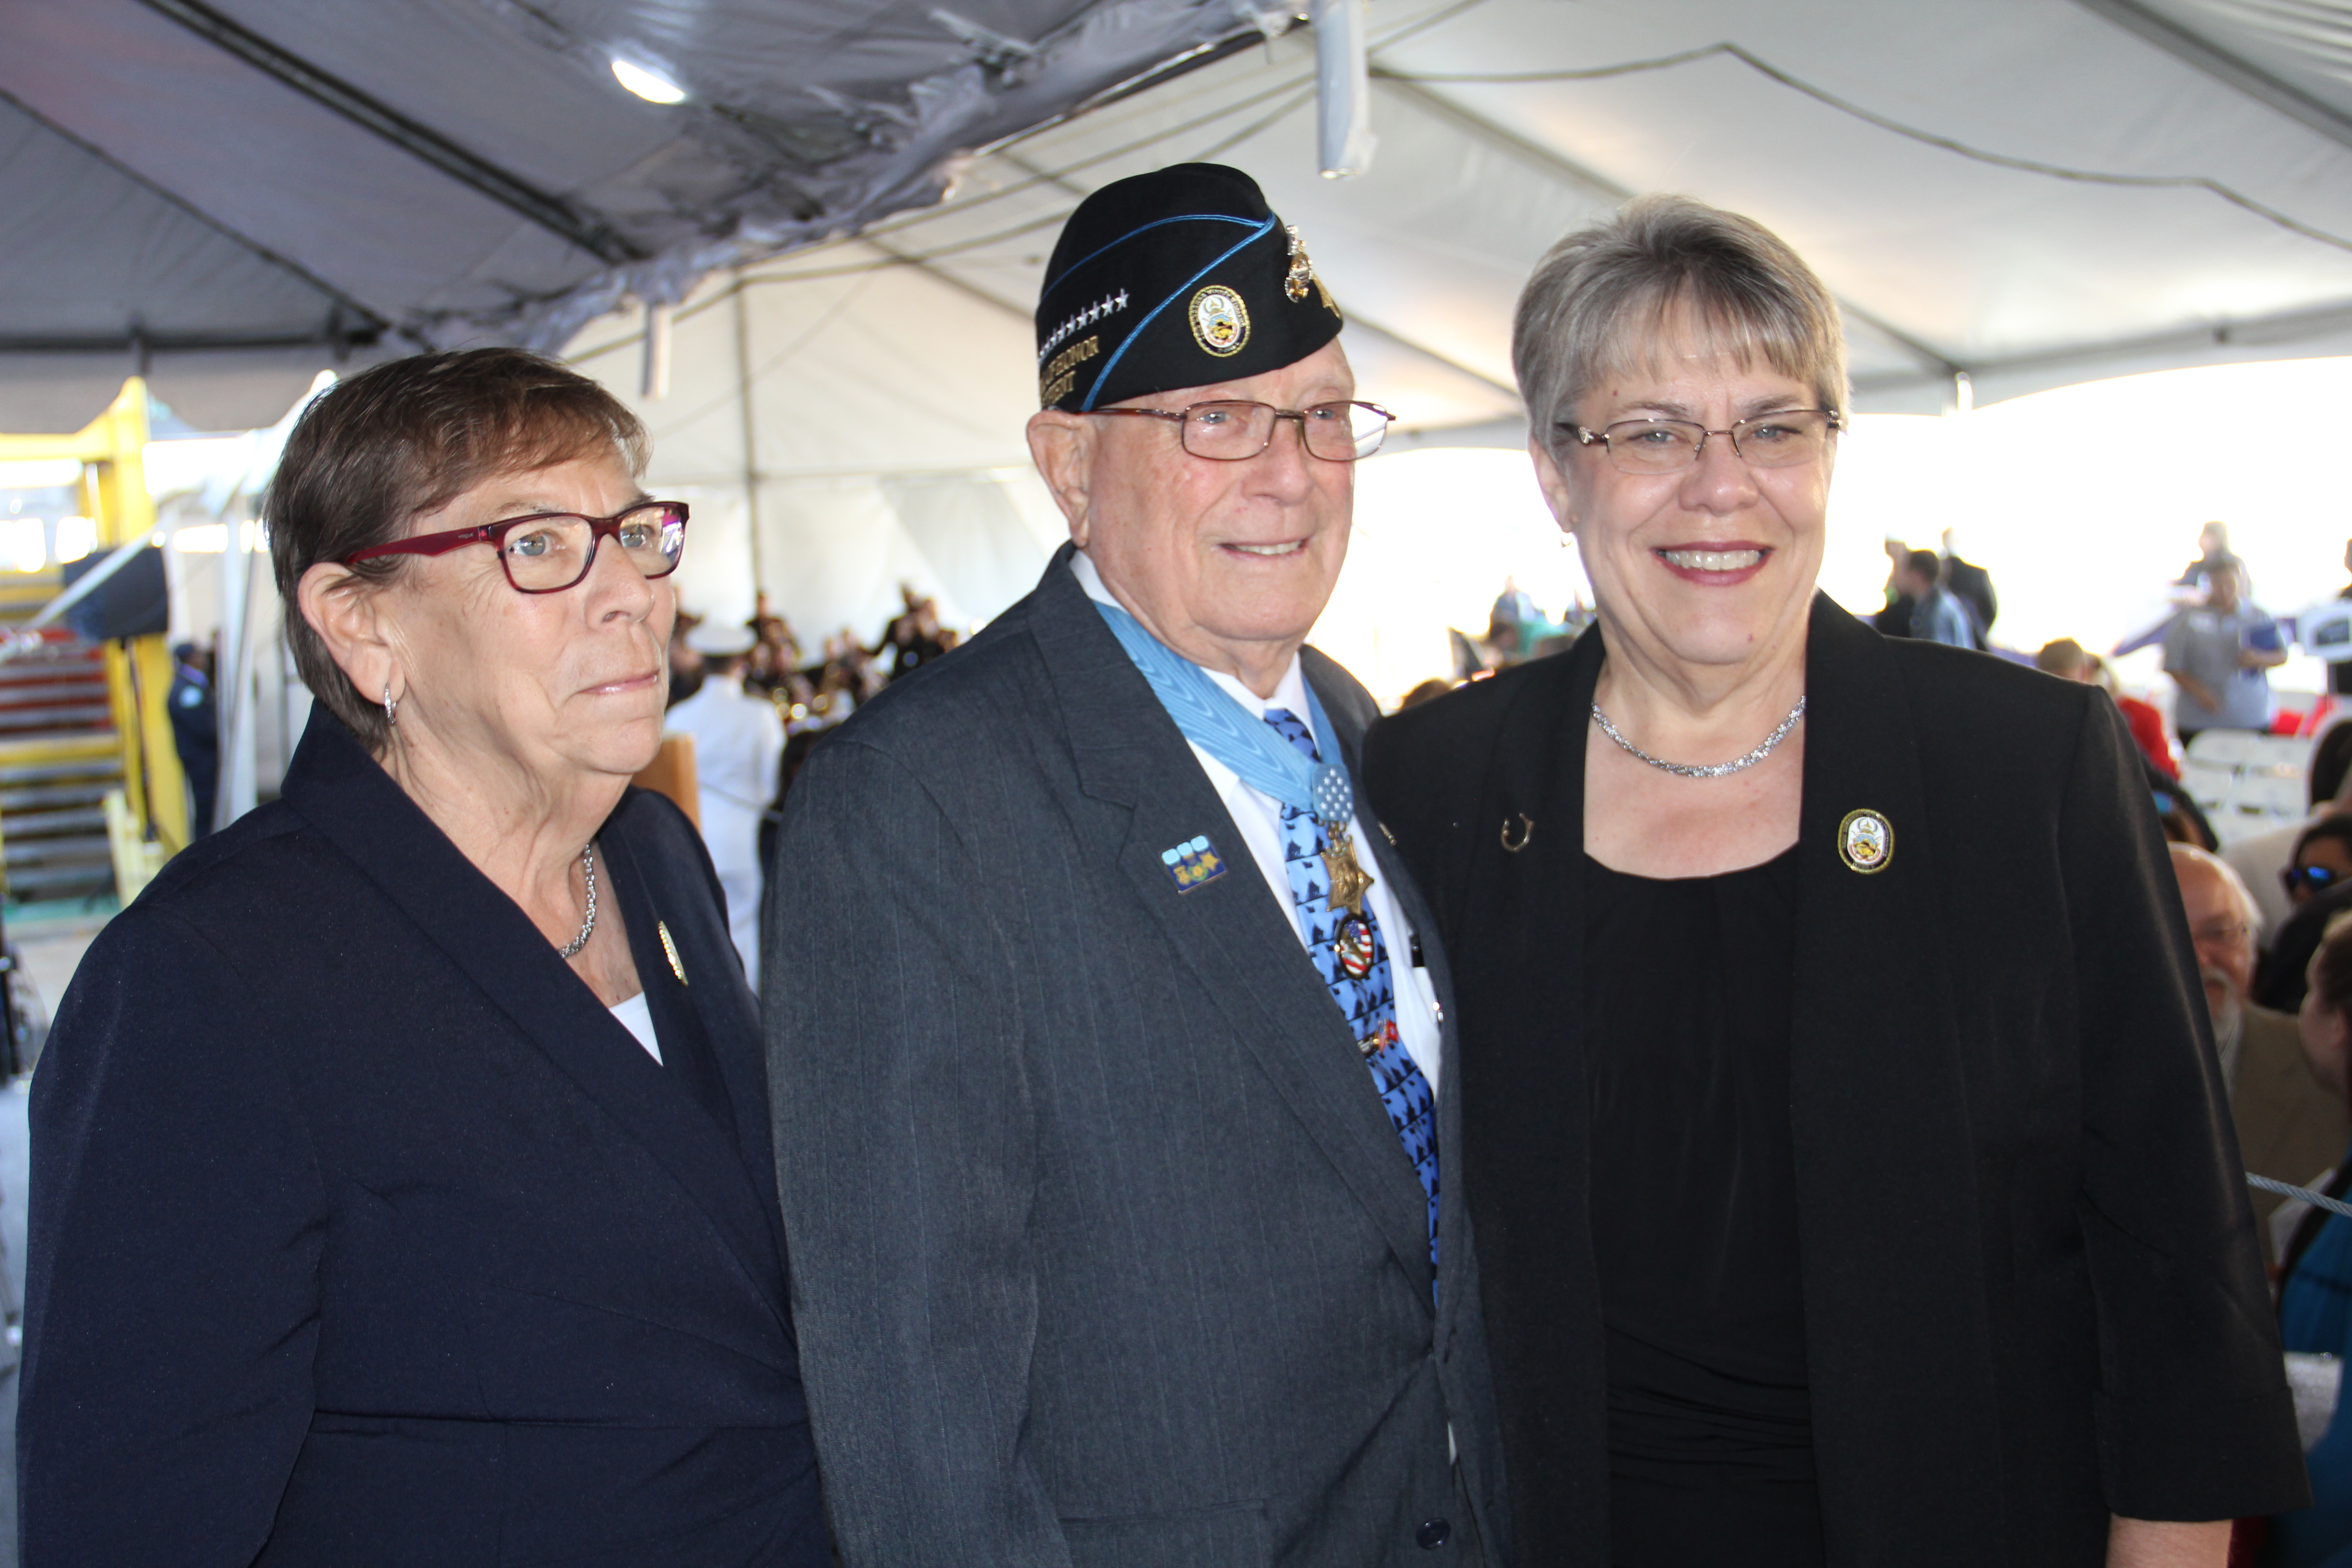 Hershel "Woody" Williams with daughters Travie Ross and Tracie Ross at the christening of the USNS Hershel "Woody" Williams expeditionary sea base built by General Dynamics NASSCO.